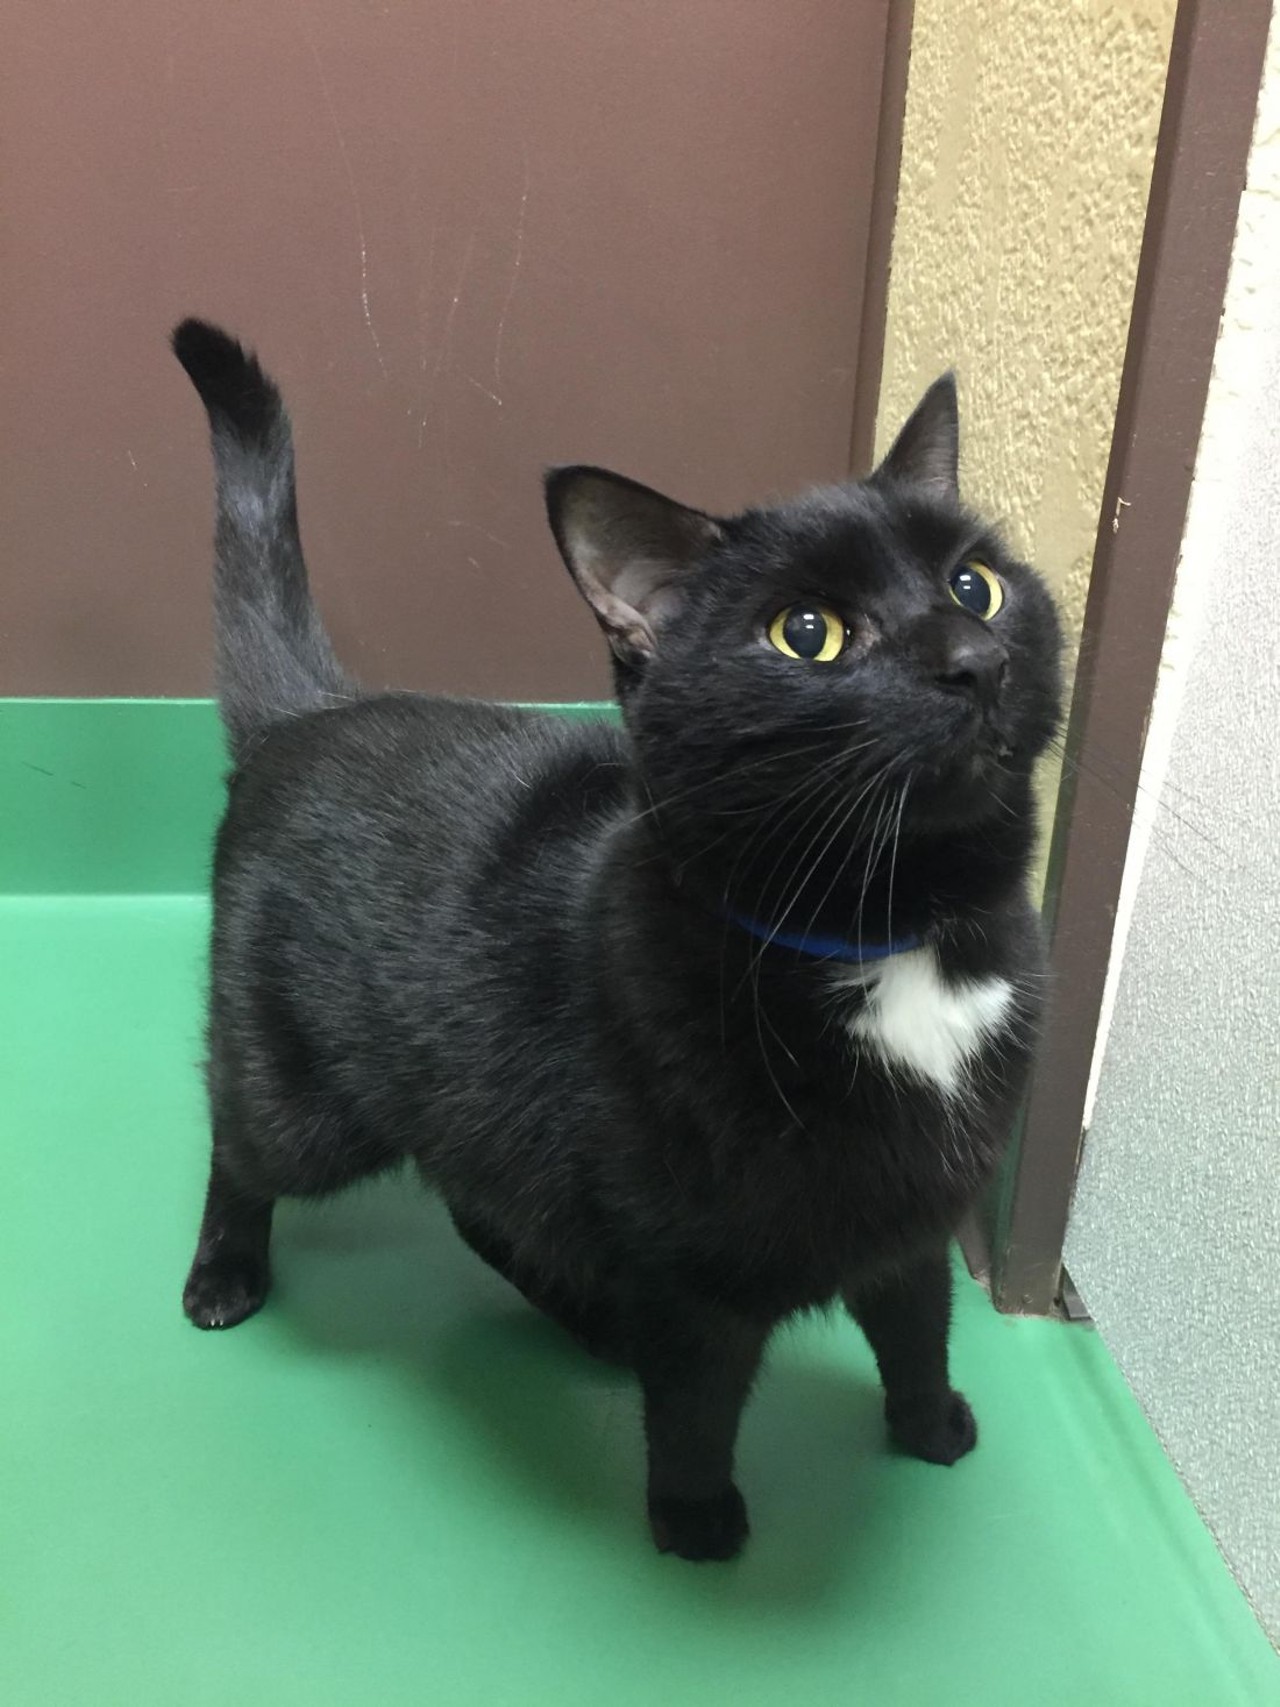 NAME: Rev
GENDER: Male
BREED: Domestic short hair
AGE: 10 years
WEIGHT: 10 pounds
SPECIAL CONSIDERATIONS: None
REASON I CAME TO MHS: Owner surrender
LOCATION: Petco in Sterling Heights
ID NUMBER: 860832